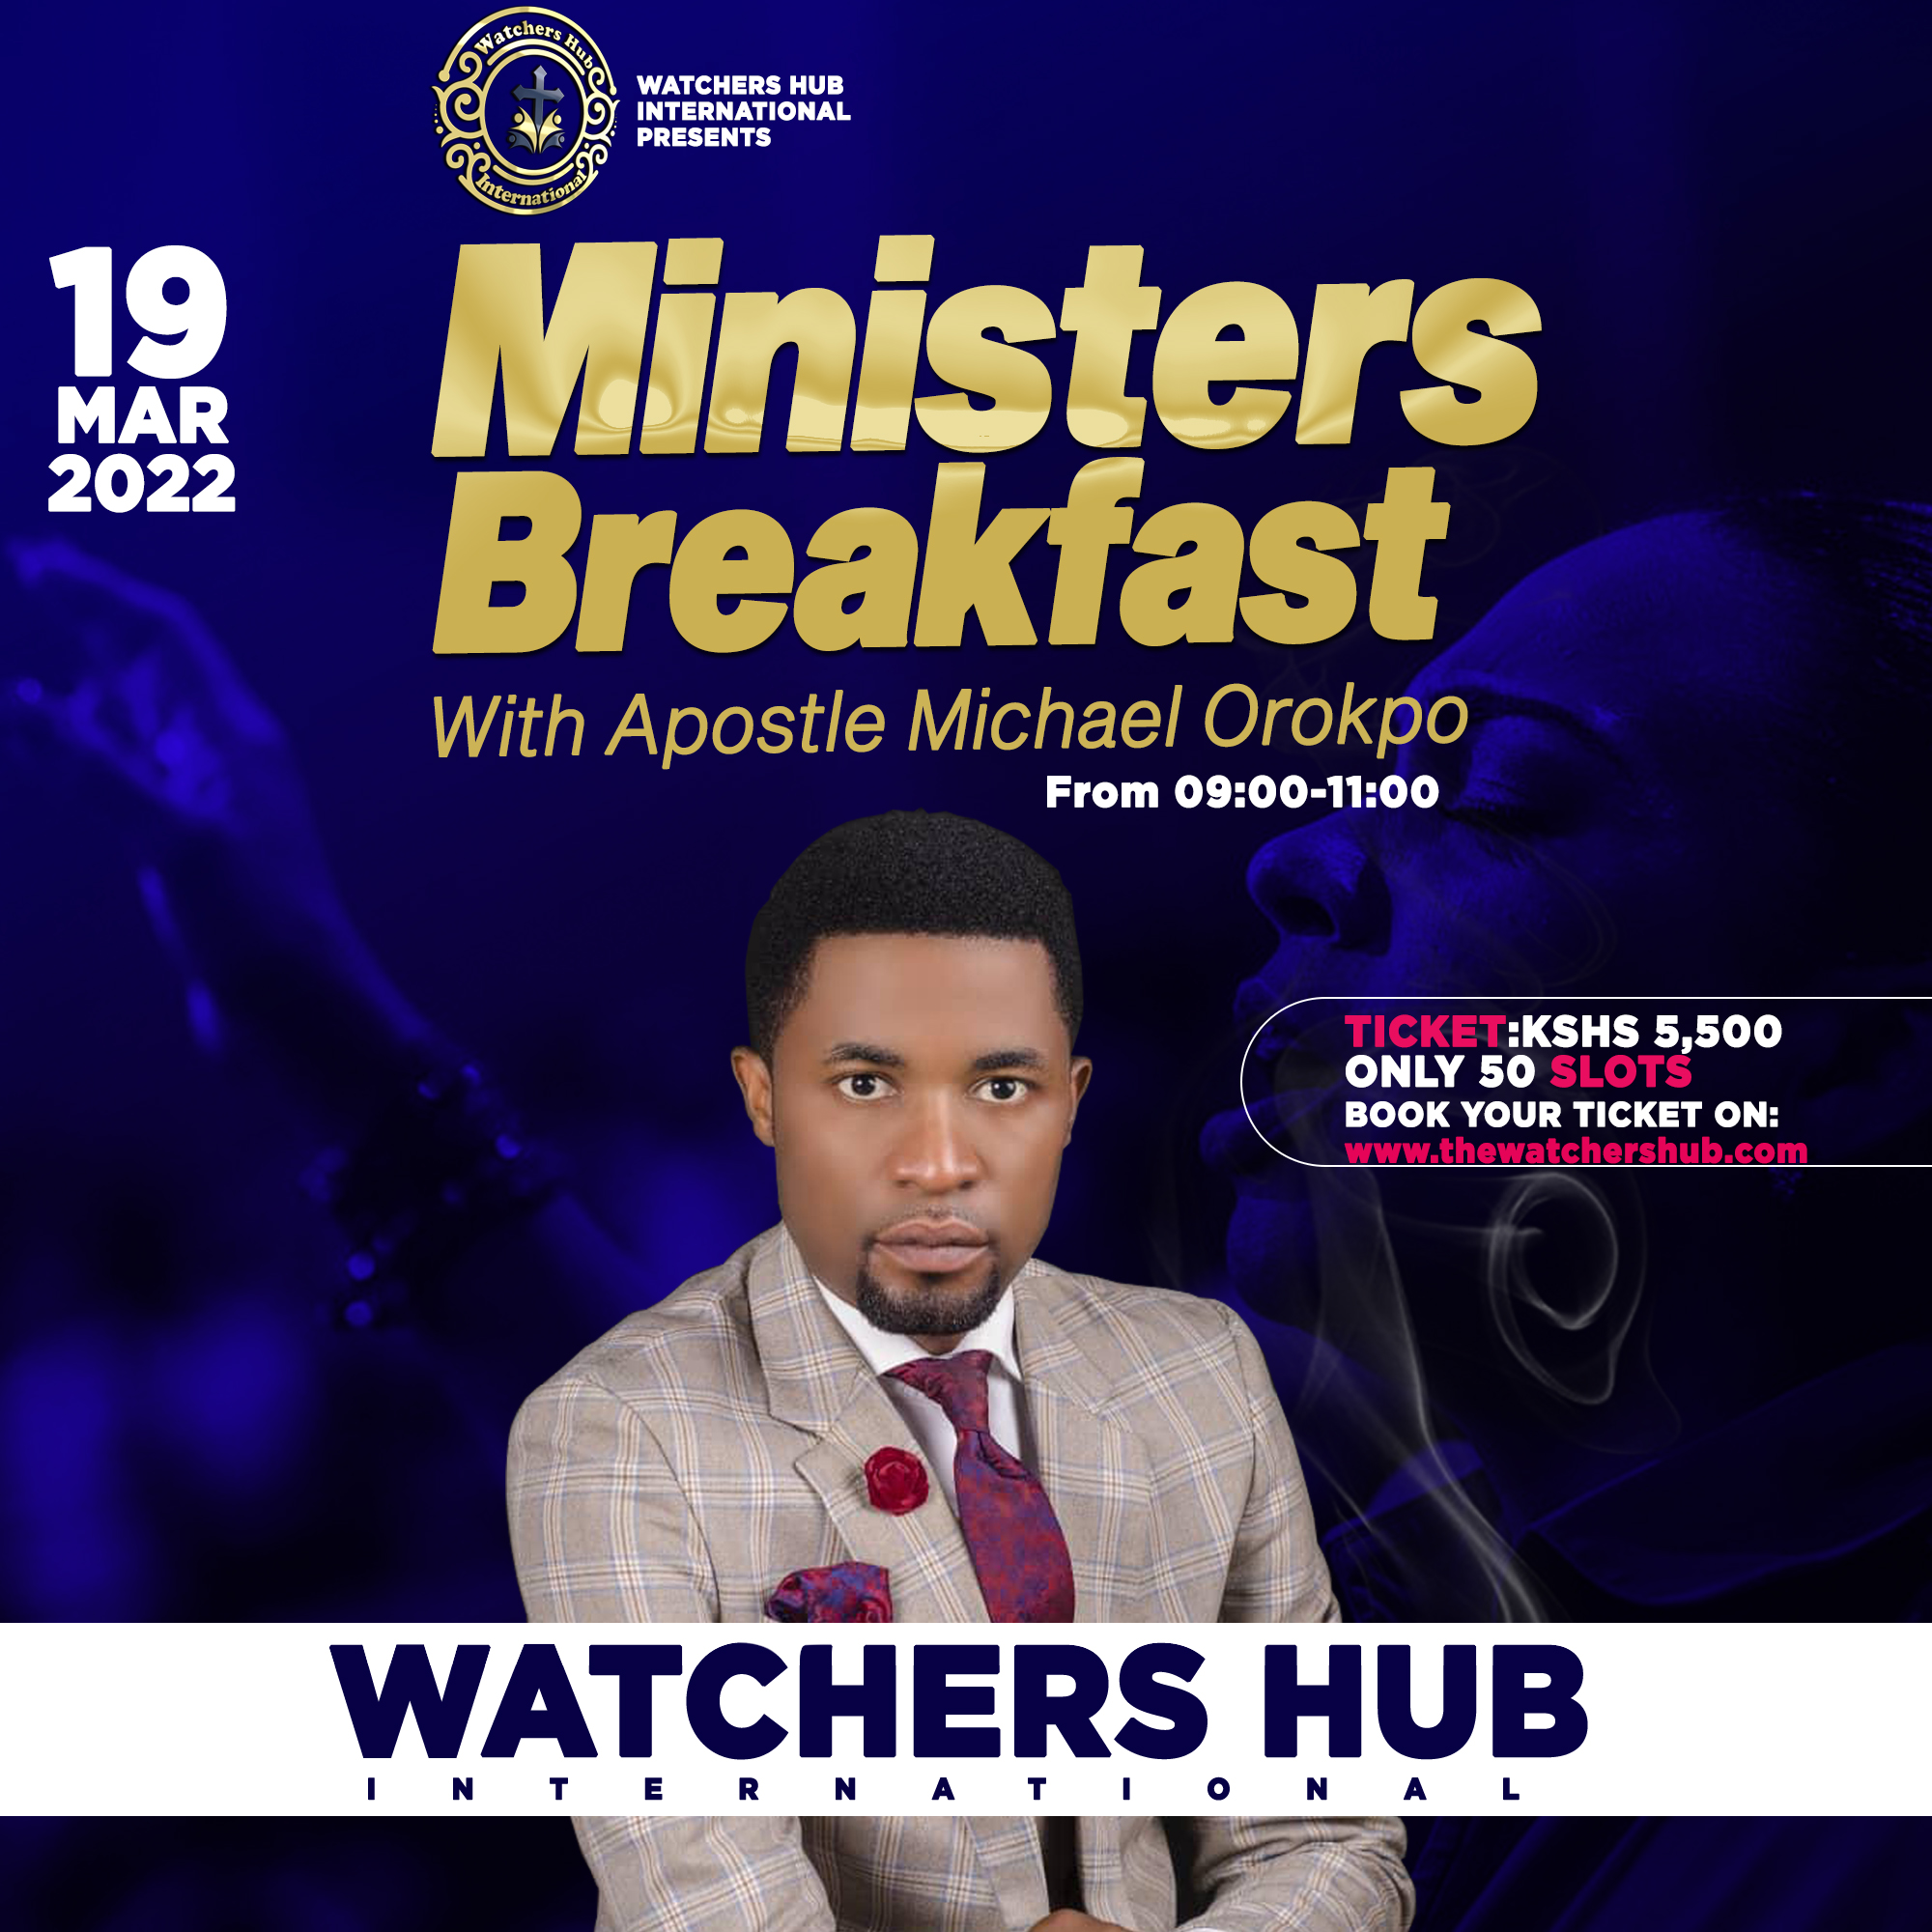 Ministers Breakfast With Apostle Michael Orokpo